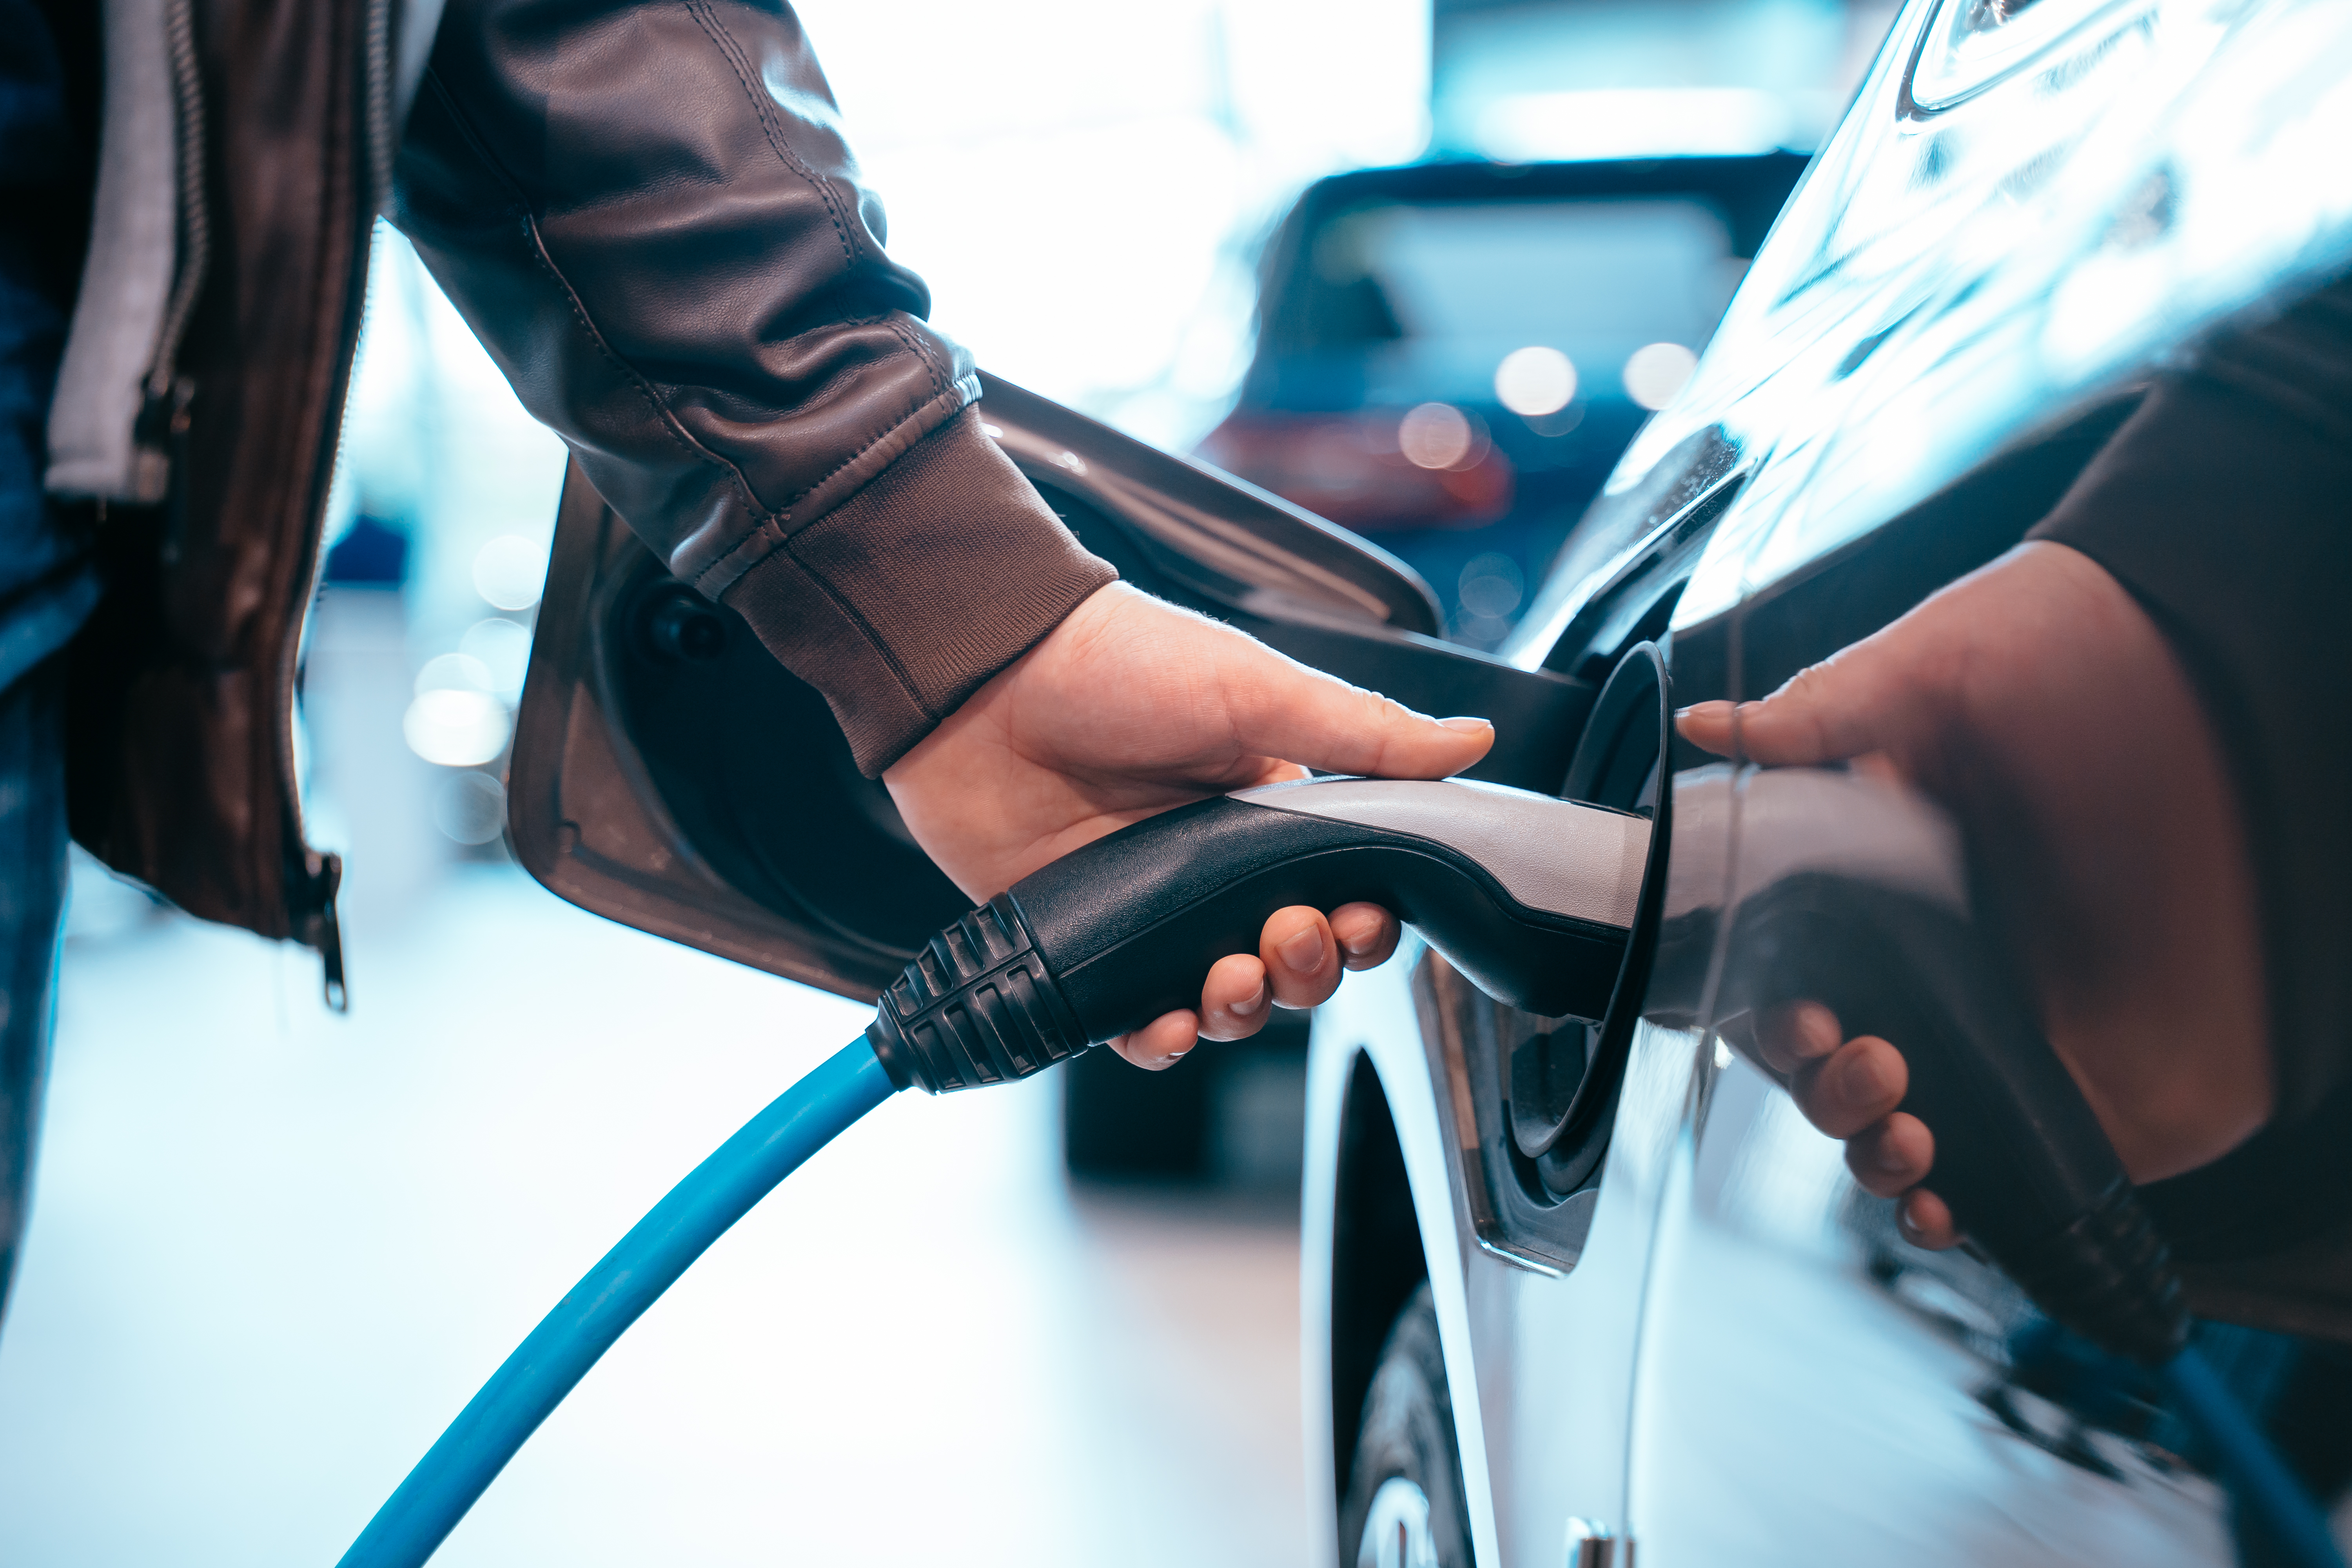 https://img.moneyduck.com/article_attachment/1664512802-human-hand-is-holding-electric-car-charging-connect-electric-car.jpg